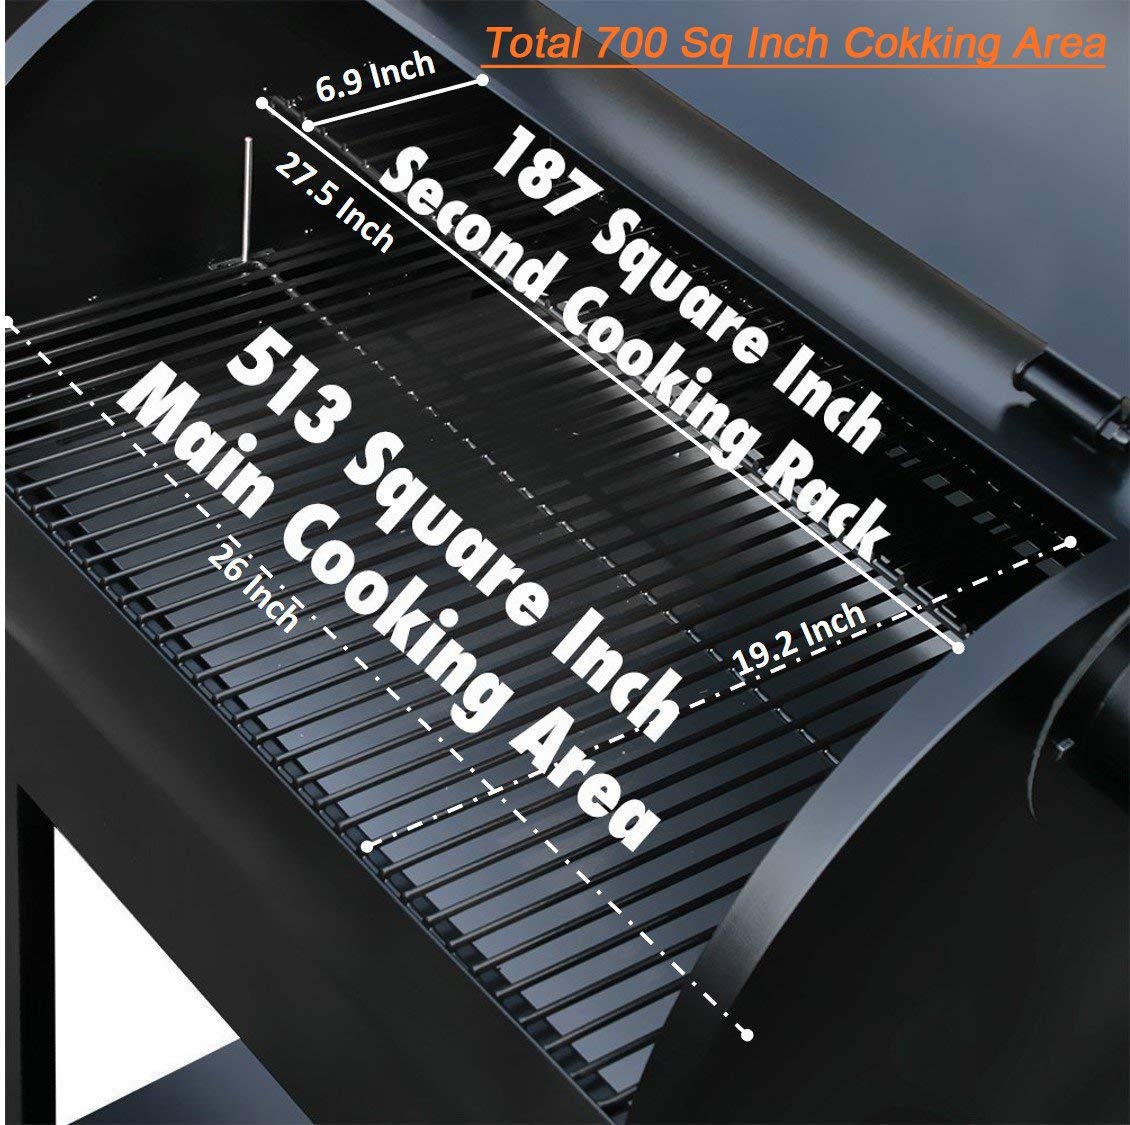 Z Grills ZPG-7002 Wood Pellet Grill & Smoker, 8 in 1 BBQ Grill Auto Temperature Control, 700 sq inch Cooking Area, Black - image 2 of 6